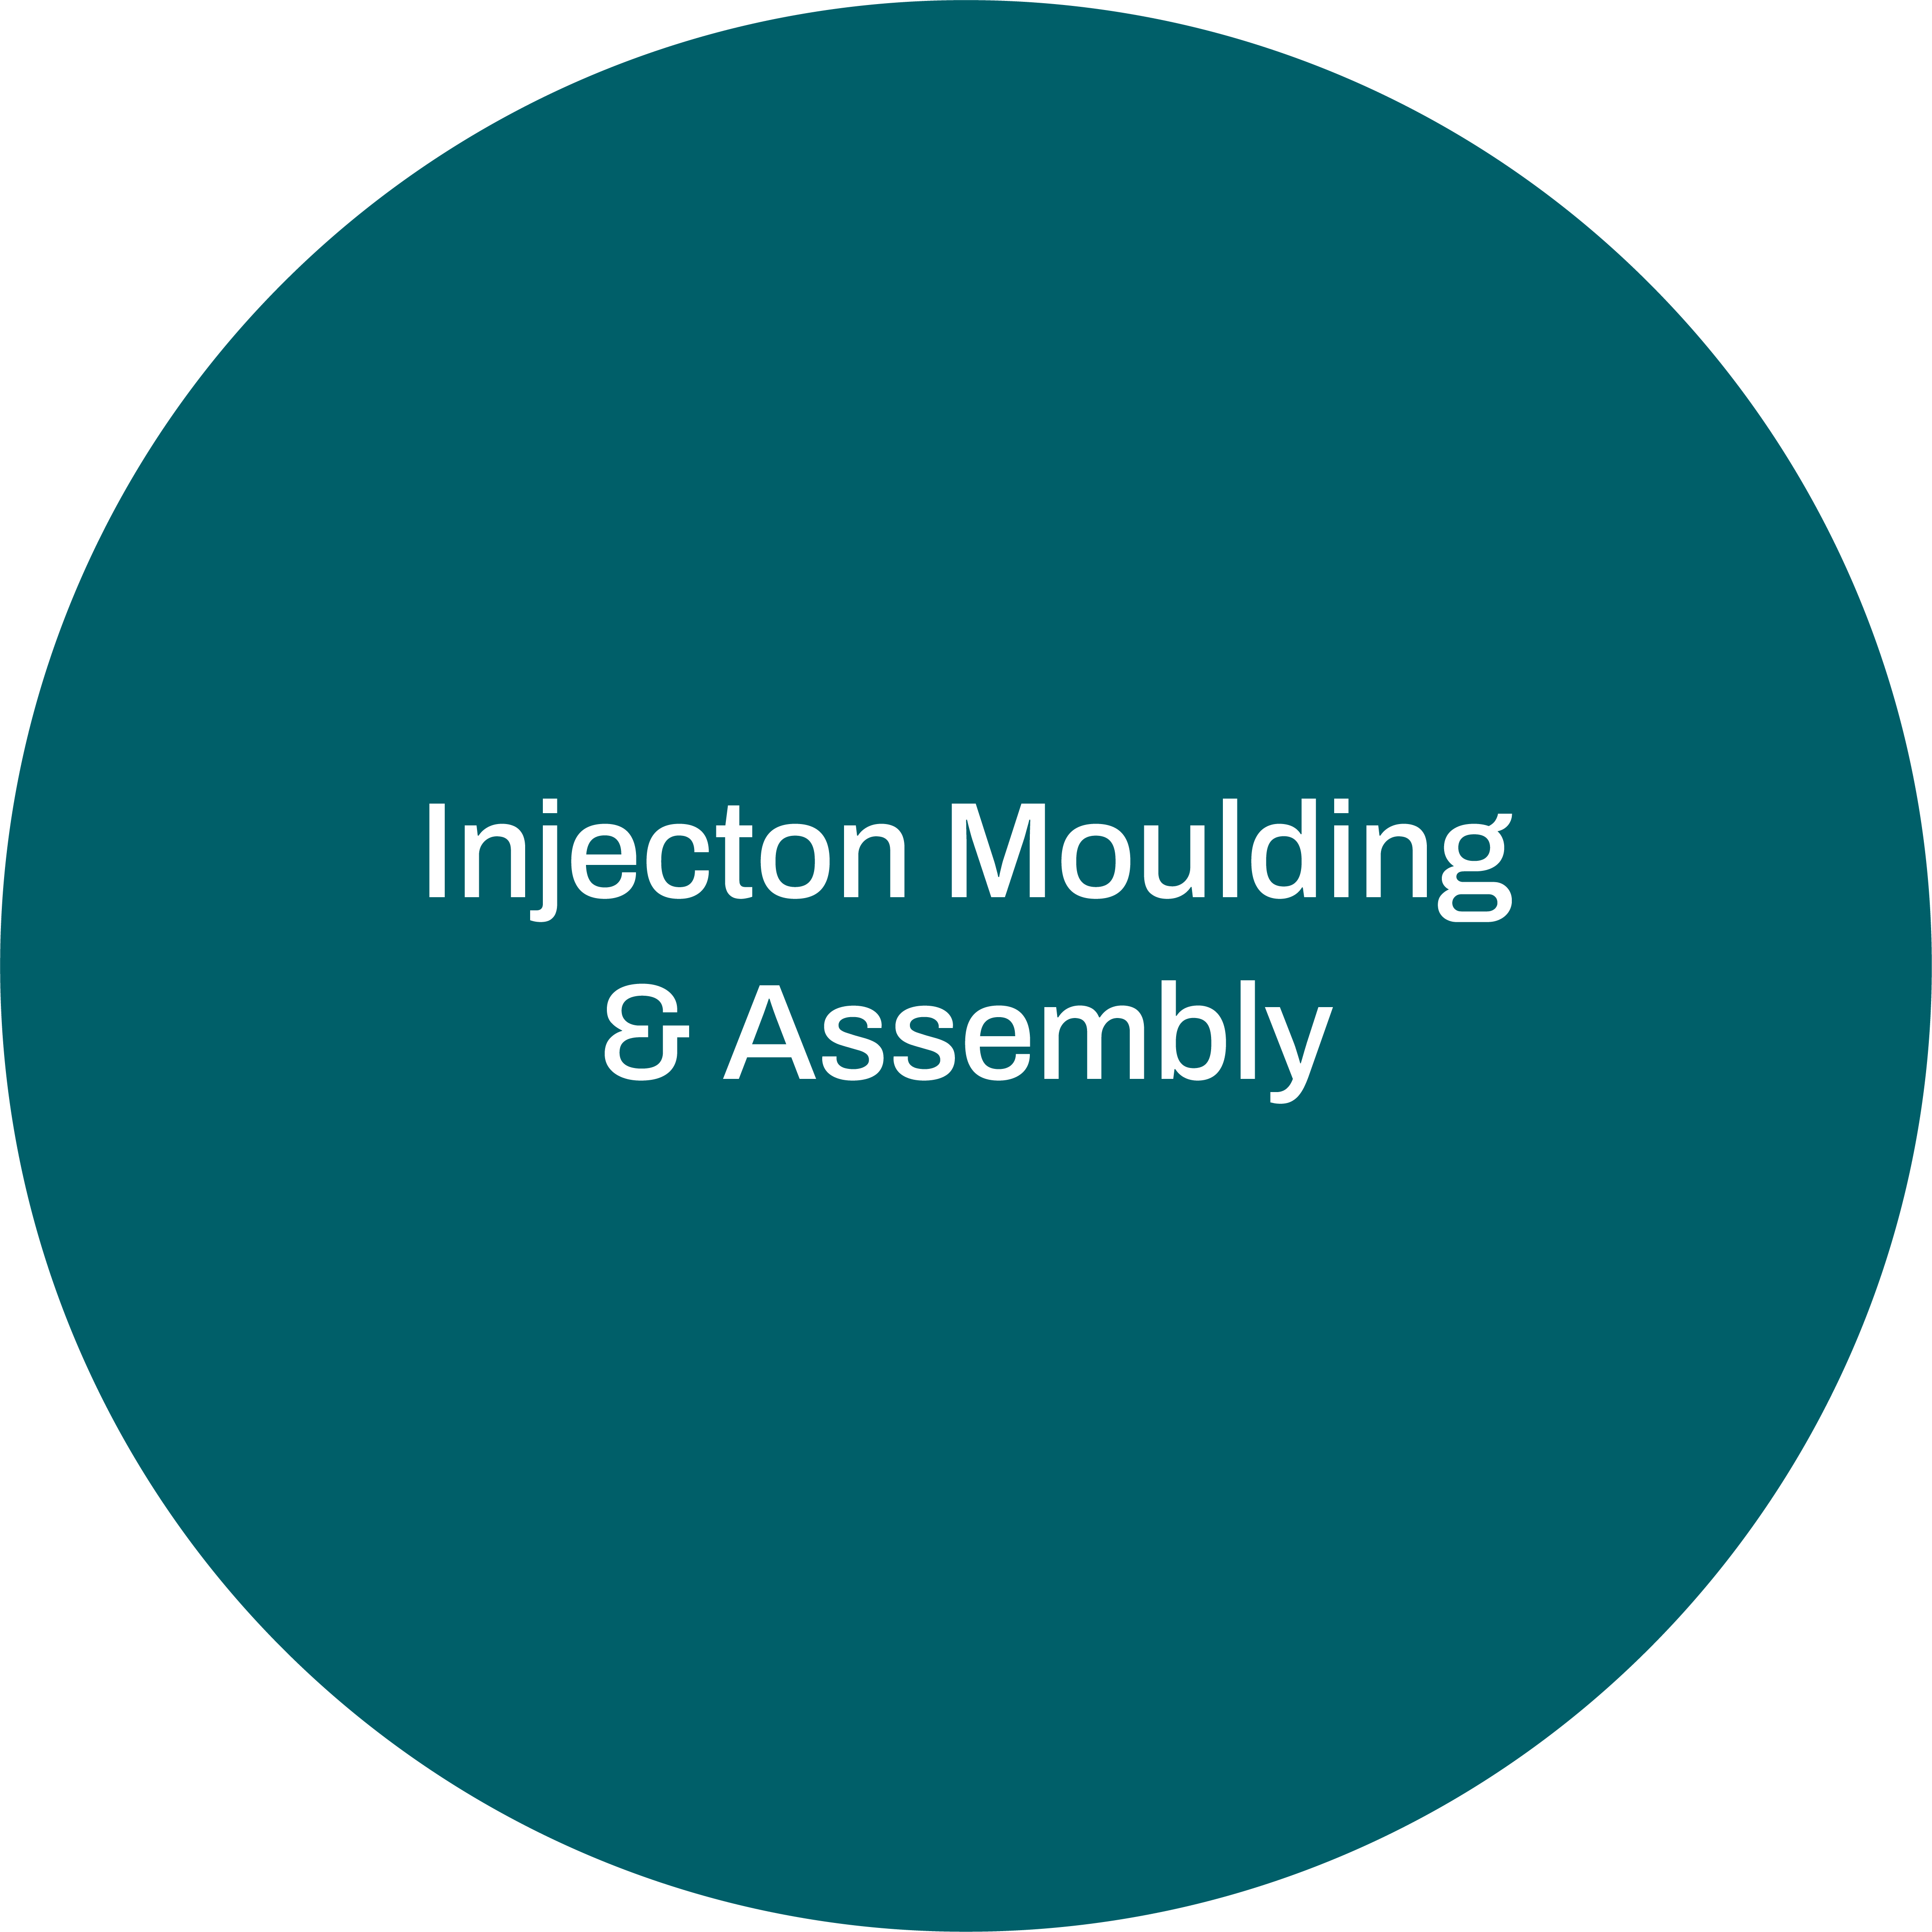 injection moulding & assembly graphic illustration